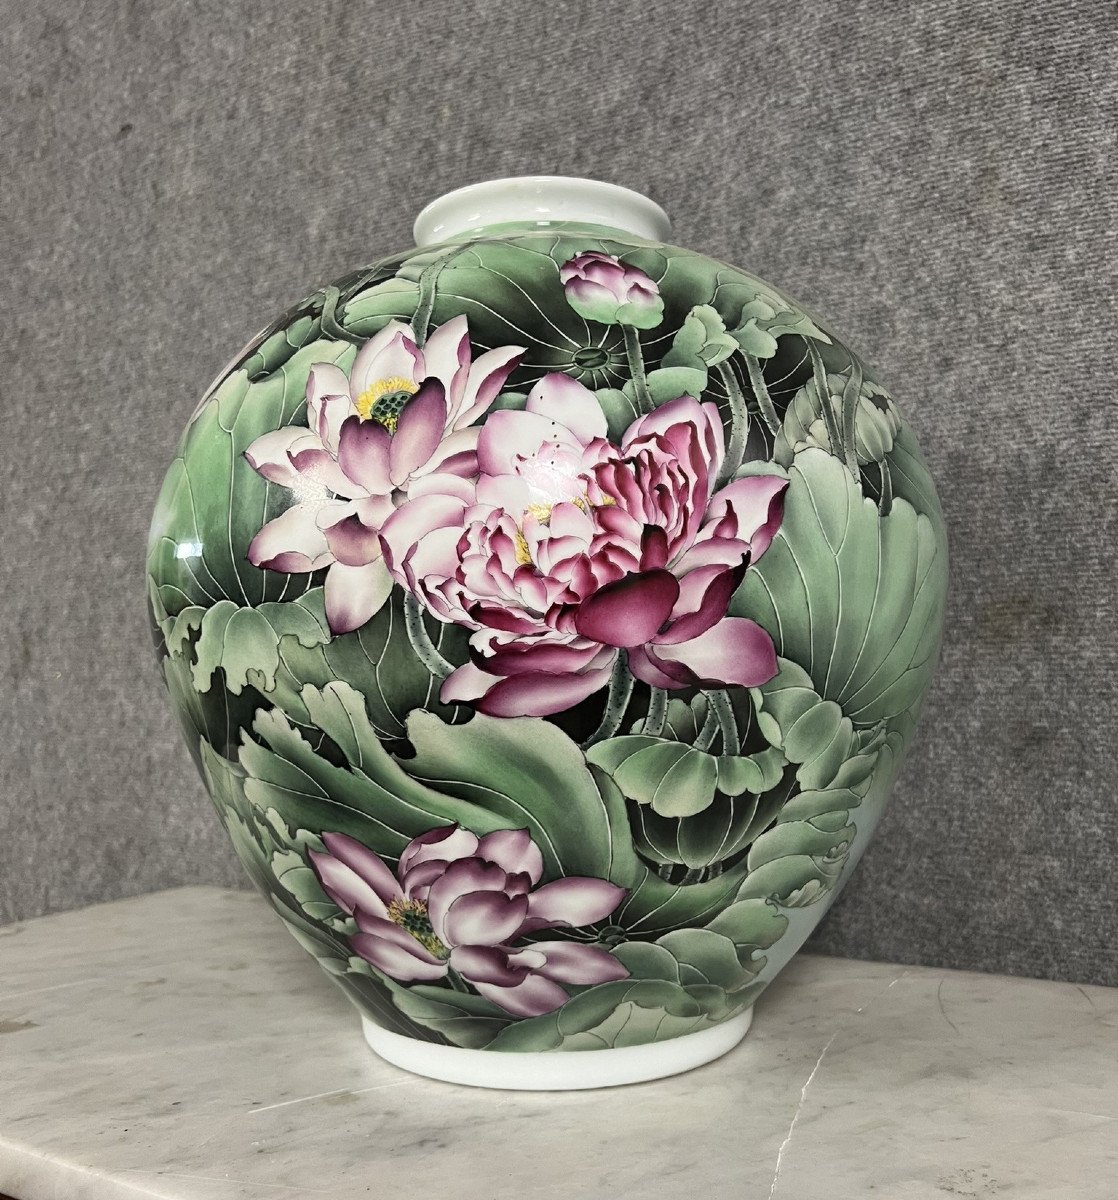 China - 20th Century: Important Porcelain Vase With Floral Decor On A Green Background  